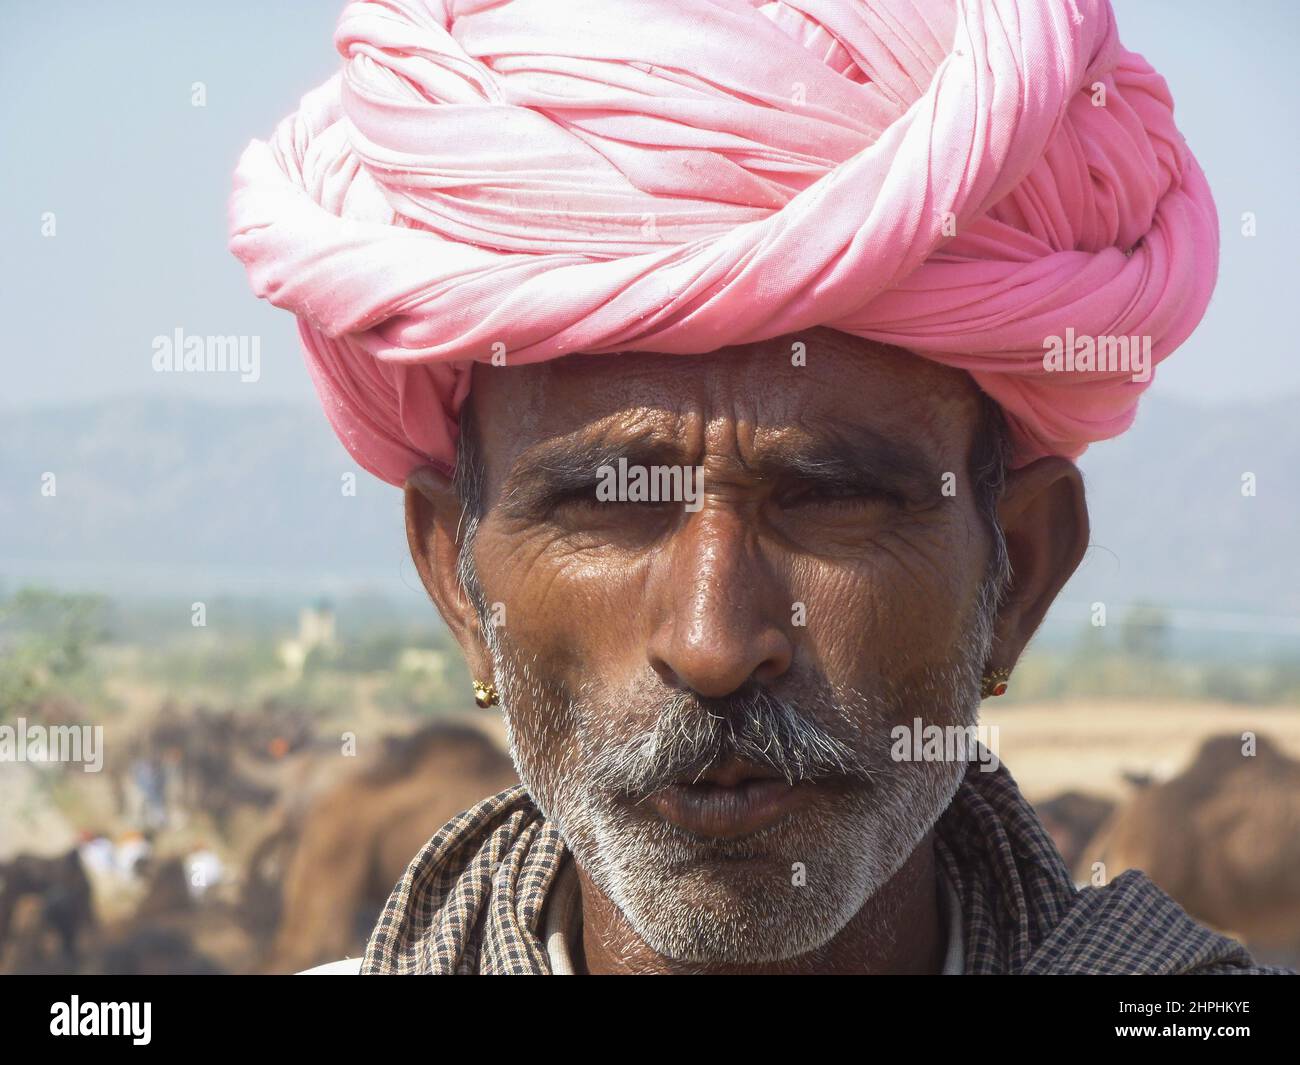 portrait of man with turban at camelfair in Pushkar, Rajasthan, Indi Stock Photo